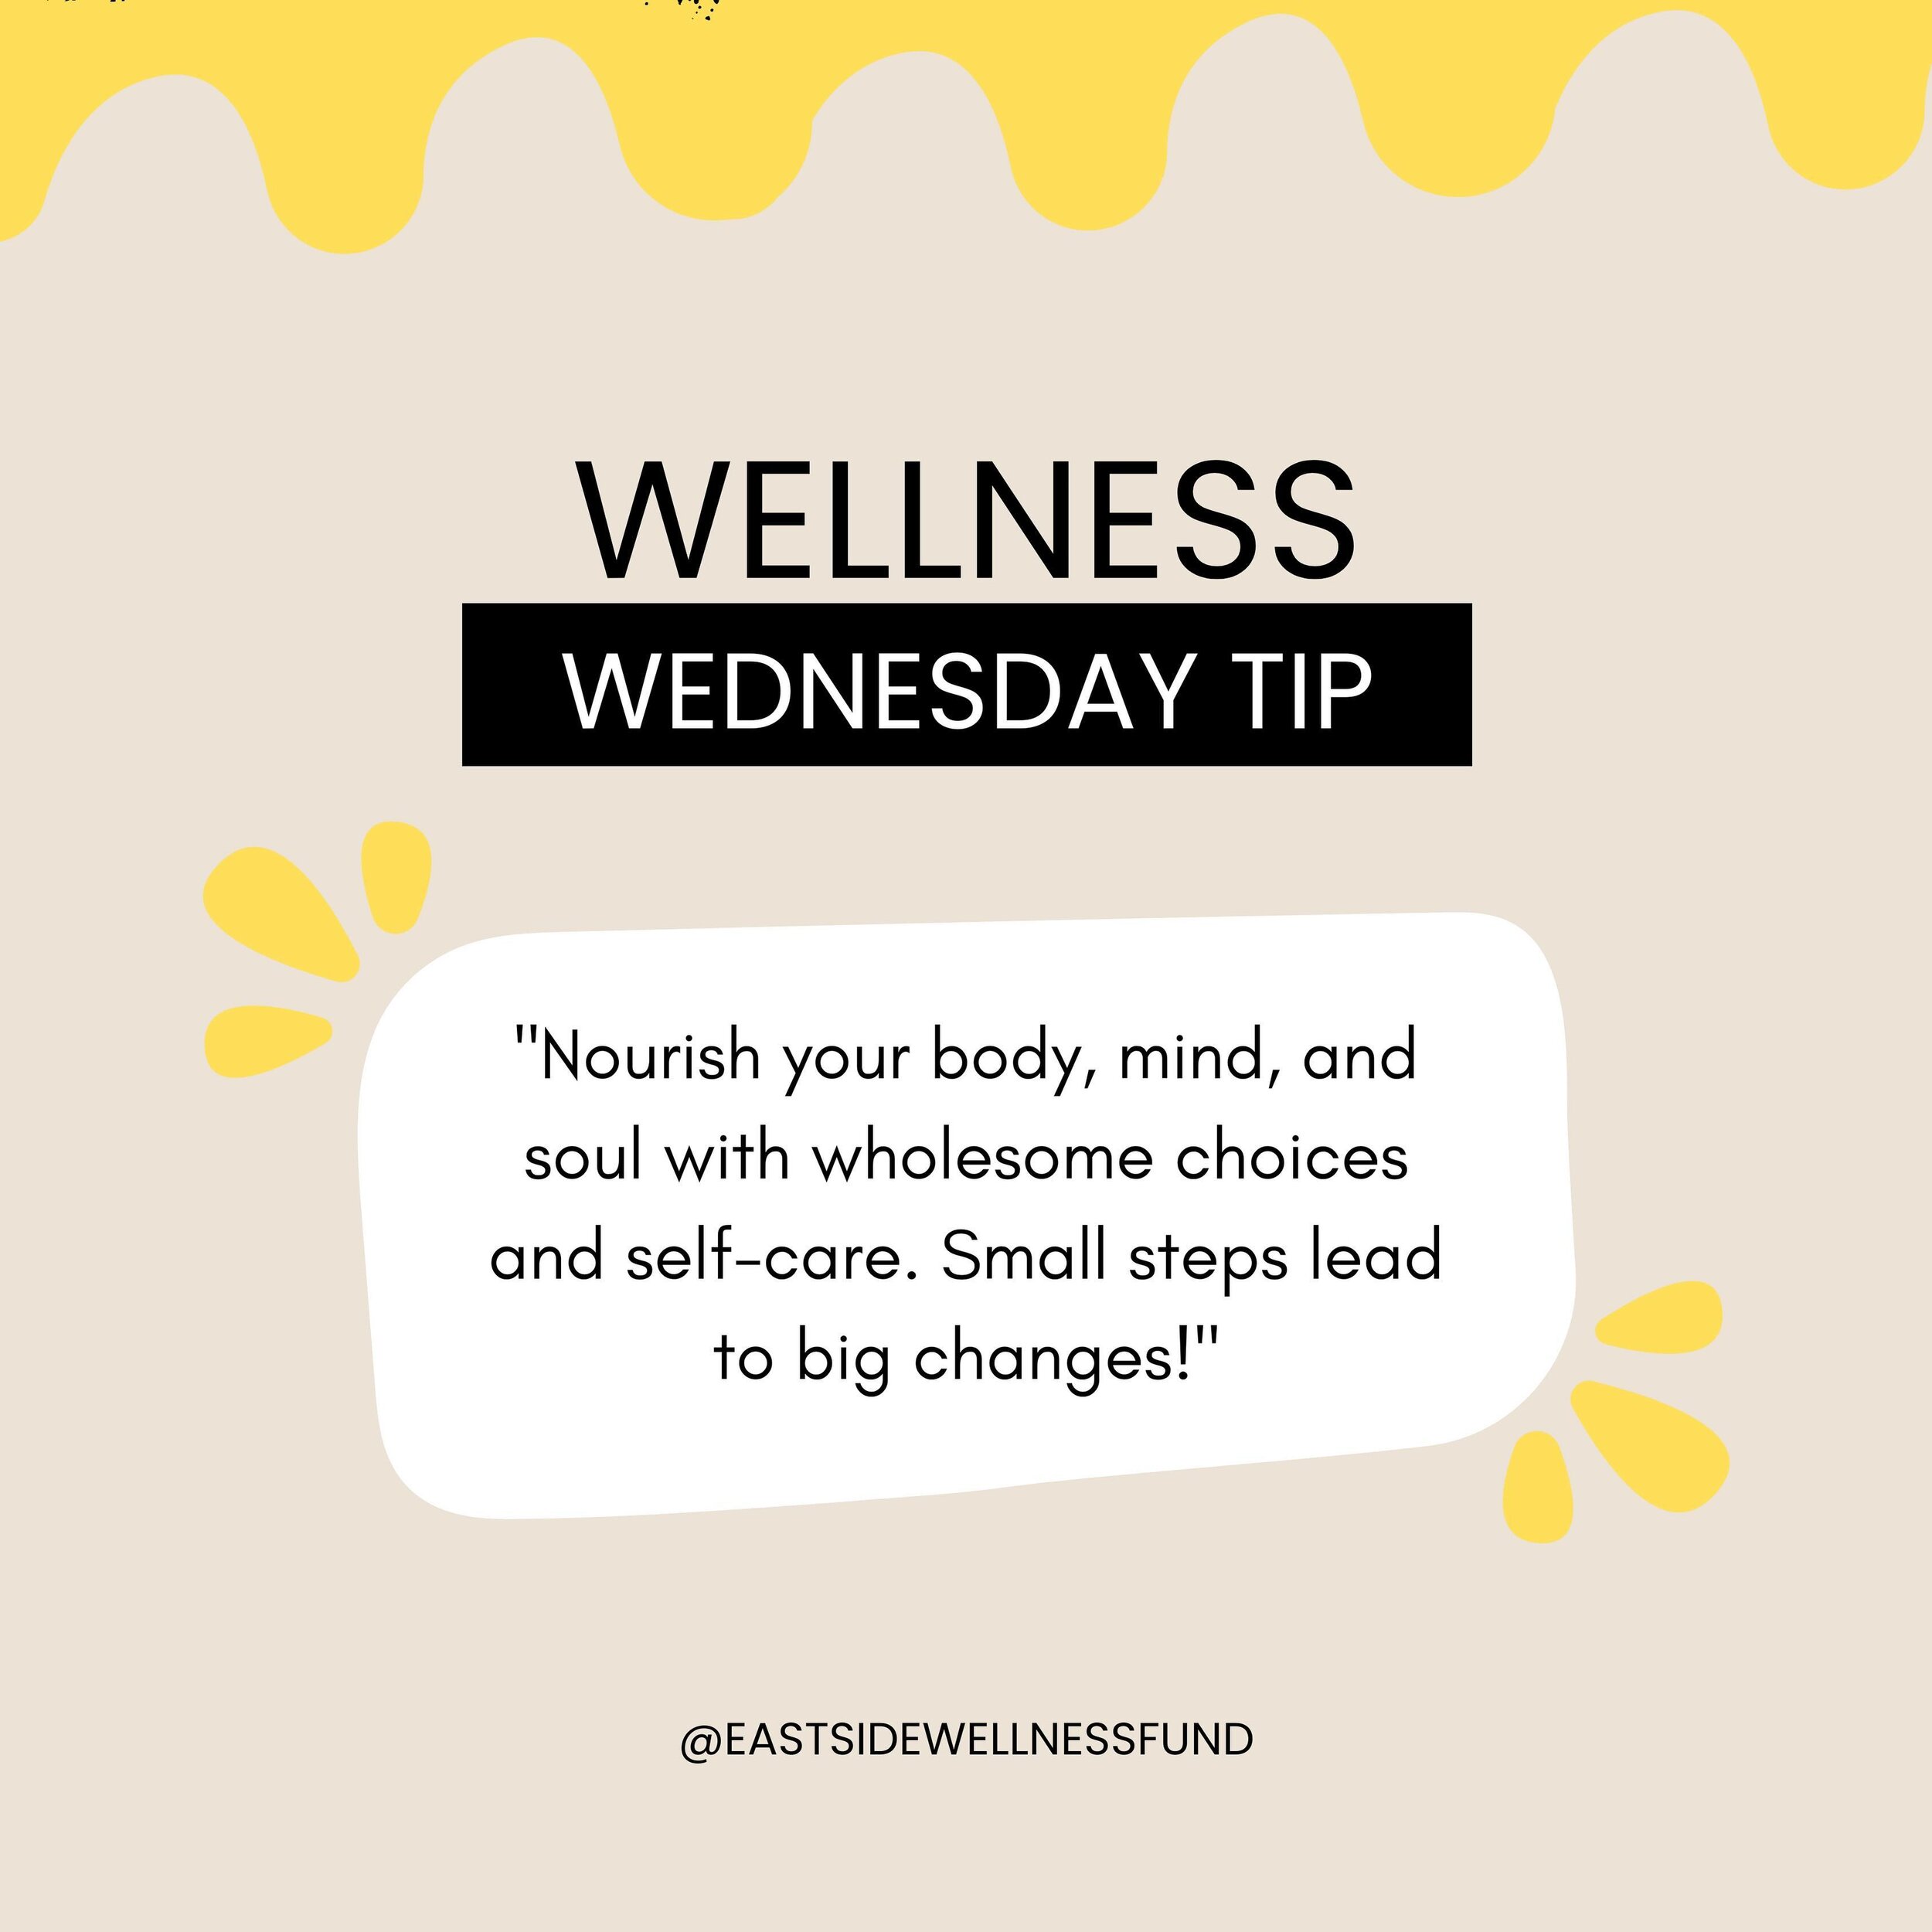 WELLNESS WEDNESDAY REMINDER 💫: nourish your body, mind, and soul with wholesome choices and self-care. Small steps lead to big changes. Thriving, not just surviving. 

#MentalHealthMatters #WellnessWednesday #SelfCare #MentalHealthResources #Seattle